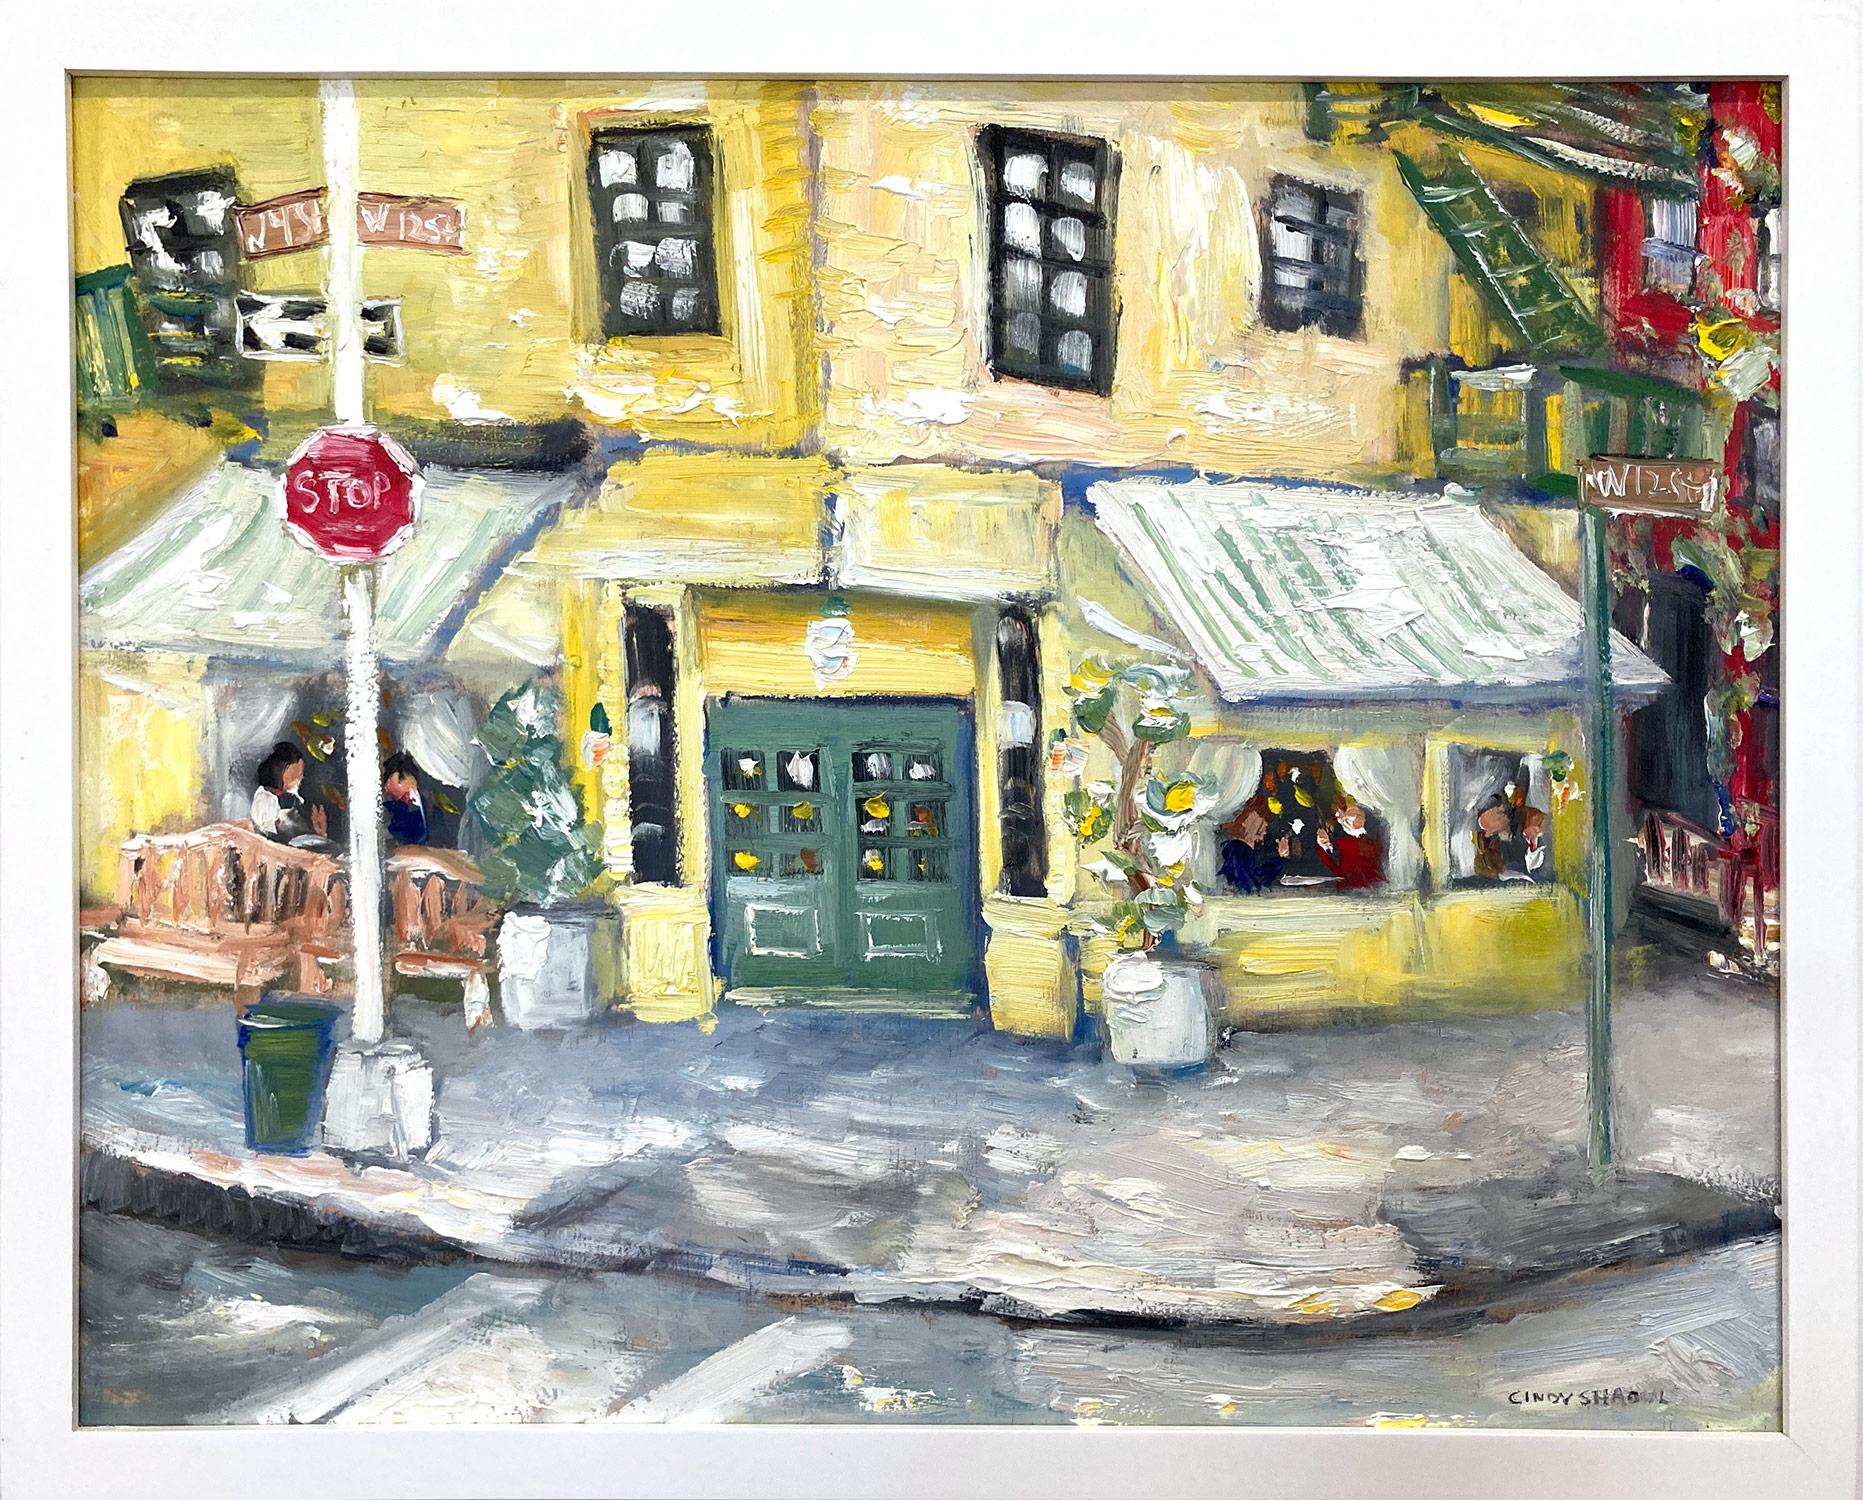 Cindy Shaoul Landscape Painting – „Cafe Cluny“ Buntes impressionistisches Restaurant-Ölgemälde in Soho, New York